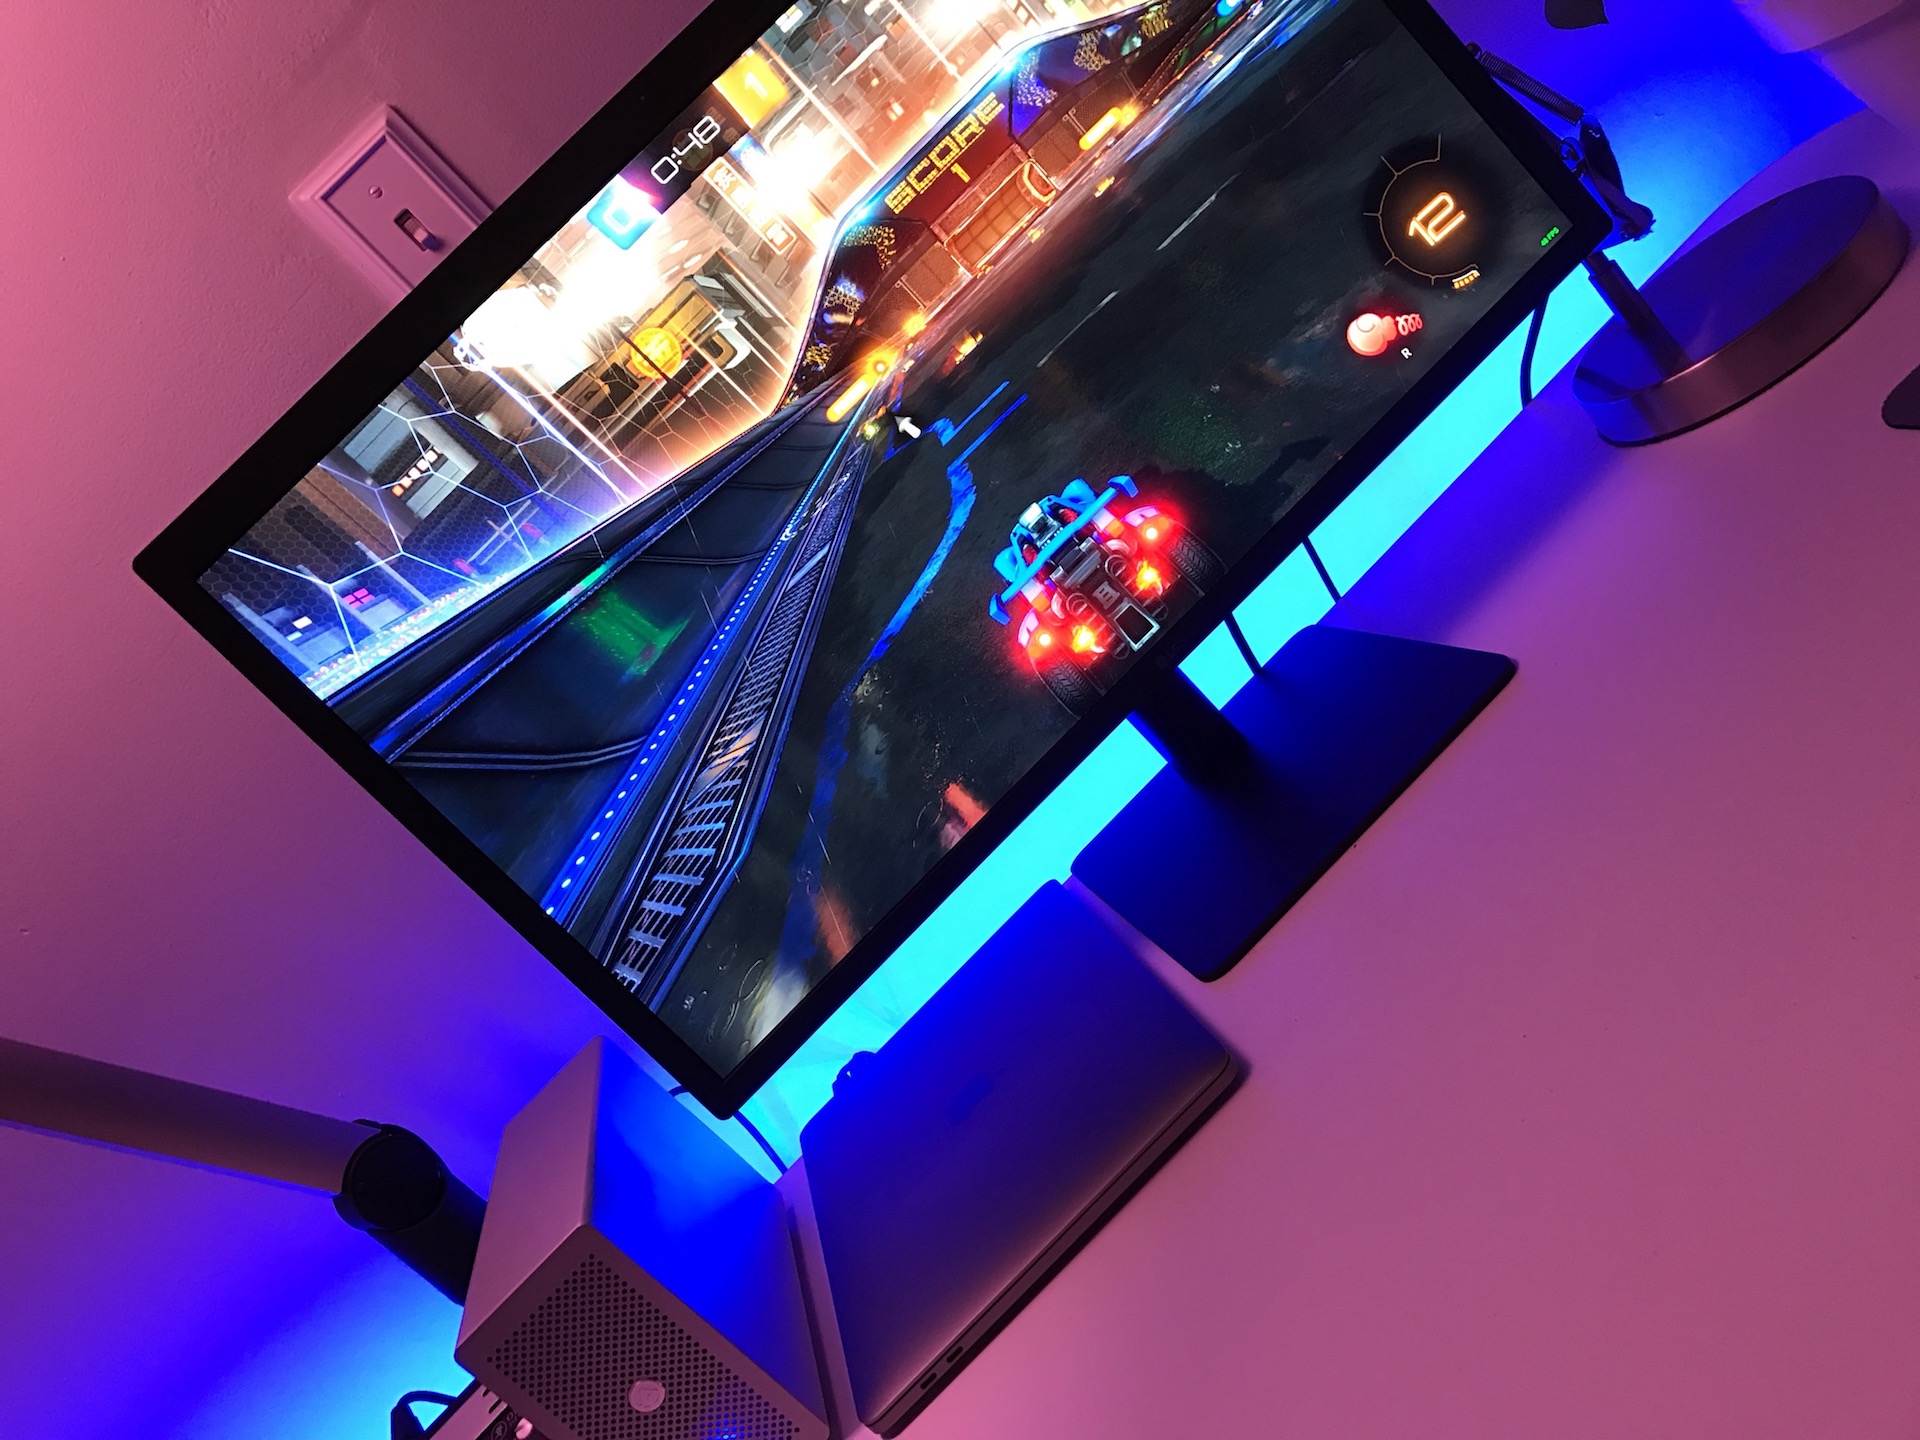 windows-10-boot-camp-macbook-pro-gaming-lg-5k-display "width =" 1000 "height =" 750 "srcset =" https://9to5mac.com/wp-content/uploads/sites /6/2017/01/windows-10-boot-camp-macbook-pro-gaming-on-lg-5k-display1.jpg 1920w, https://9to5mac.com/wp-content/uploads/sites/6/ 2017/01 / windows-10-boot-camp-macbook-pro-gaming-lg-5k-display1.jpg? Resize = 155,116 155w, https://9to5mac.com/wp-content/uploads/sites/6 /2017/01/windows-10-boot-camp-macbook-pro-gaming-on-lg-5k-display1.jpg?resize=655,491 655w, https://9to5mac.com/wp-content/uploads/sites/ 6/2017/01 / windows-10-boot-camp-macbook-pro-gaming-lg-5k-display1.jpg? Resize = 768,576 768w, https://9to5mac.com/wp-content/uploads/sites /6/2017/01/windows-10-boot-camp-macbook-pro-gaming-on-lg-5k-display1.jpg?resize=1024,768 1024w, https://9to5mac.com/wp-content/ uploads / sites / 6/2017/01 / windows-10-boot-camp-macbook-pro-gaming-lg-5k-display1.jpg? resize = 350 263 350w, https://9to5mac.com/wp-content / uploads / sites / 6/2017/01 / windows-10-boot-camp-macbook-pro-gami ng-on-lg-5k-display1.jpg? resize = 1333,1000 1333w, https://9to5mac.com/wp-content/uploads/sites/6/2017/01/windows-10-boot-camp-macbook -pro-gaming-lg-5k-display1.jpg? resize = 1376,1032 1376w, https://9to5mac.com/wp-content/uploads/sites/6/2017/01/windows-10-boot- camp-macbook-pro-gaming-lg-5k-display1.jpg? resize = 1044 783 1044w, https://9to5mac.com/wp-content/uploads/sites/6/2017/01/windows-10 -boot-camp-macbook-pro-gaming-lg-5k-display1.jpg? resize = 632 474 632w, https://9to5mac.com/wp-content/uploads/sites/6/2017/01/windows- 10-boot-camp-macbook-pro-gaming-sur-lg-5k-display1.jpg? Resize = 536,402 536w "tailles =" (largeur maximale: 1000px) 100vw, 1000px "/></p>
<p style=